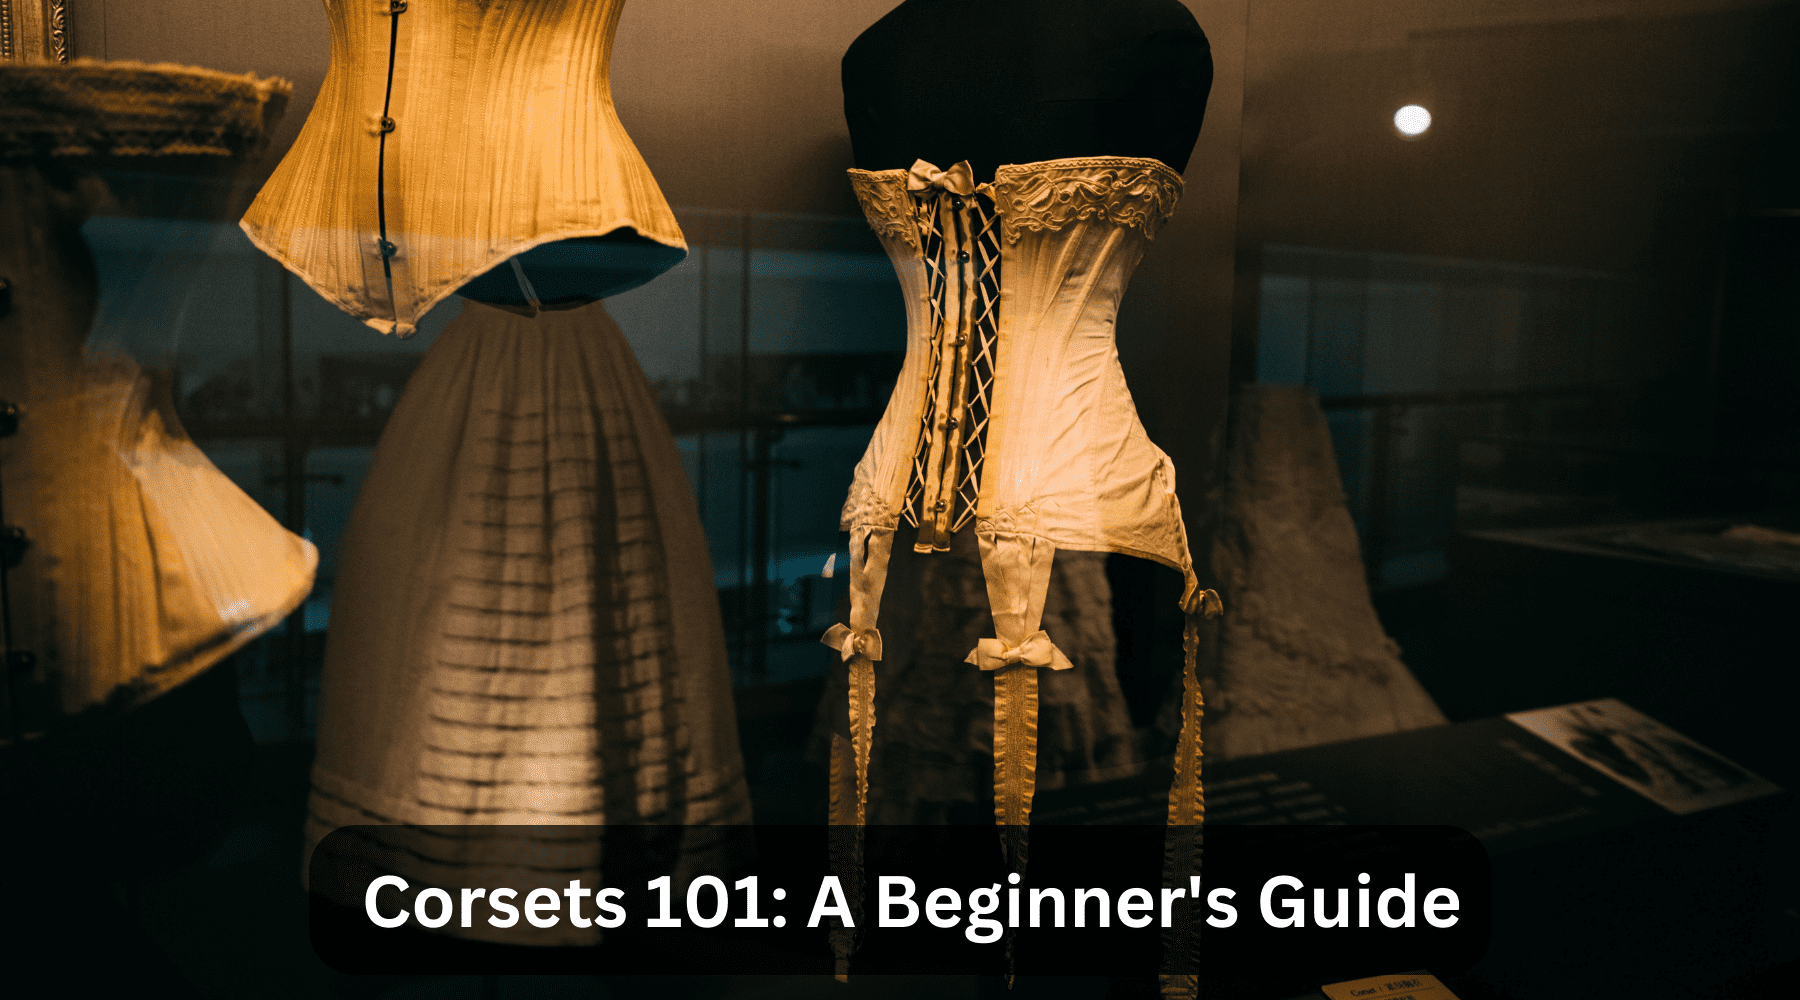 The Full Guide to Corset Vocabulary